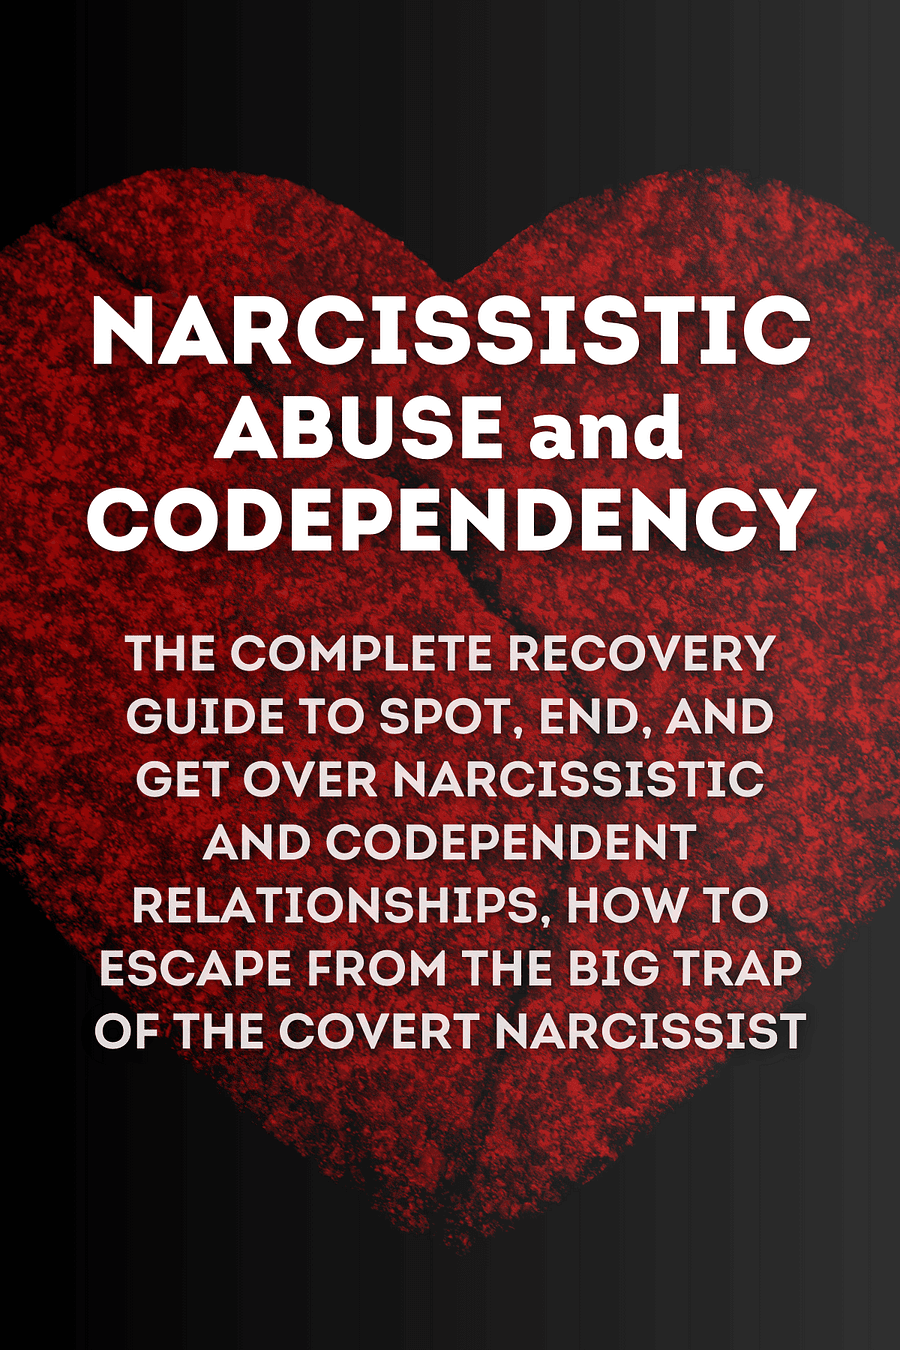 Narcissistic Abuse and Codependency by Courtney Evans - Book Summary